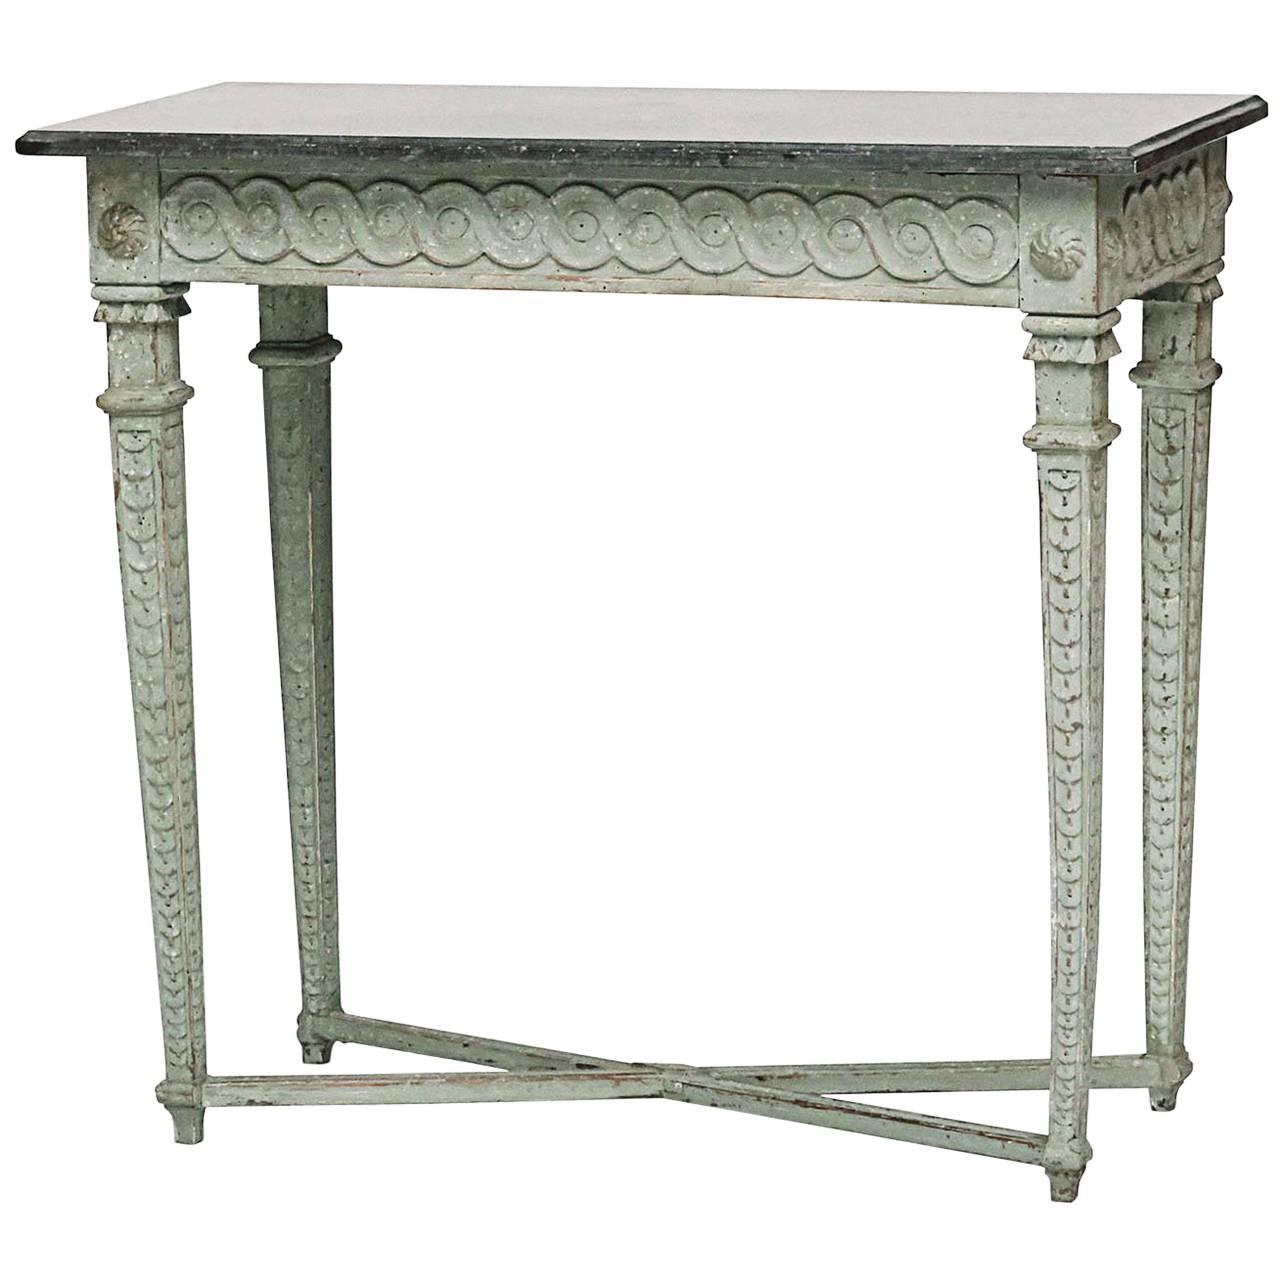 Swedish Late Gustavian Painted Console, Late 18th-Early 19th Century